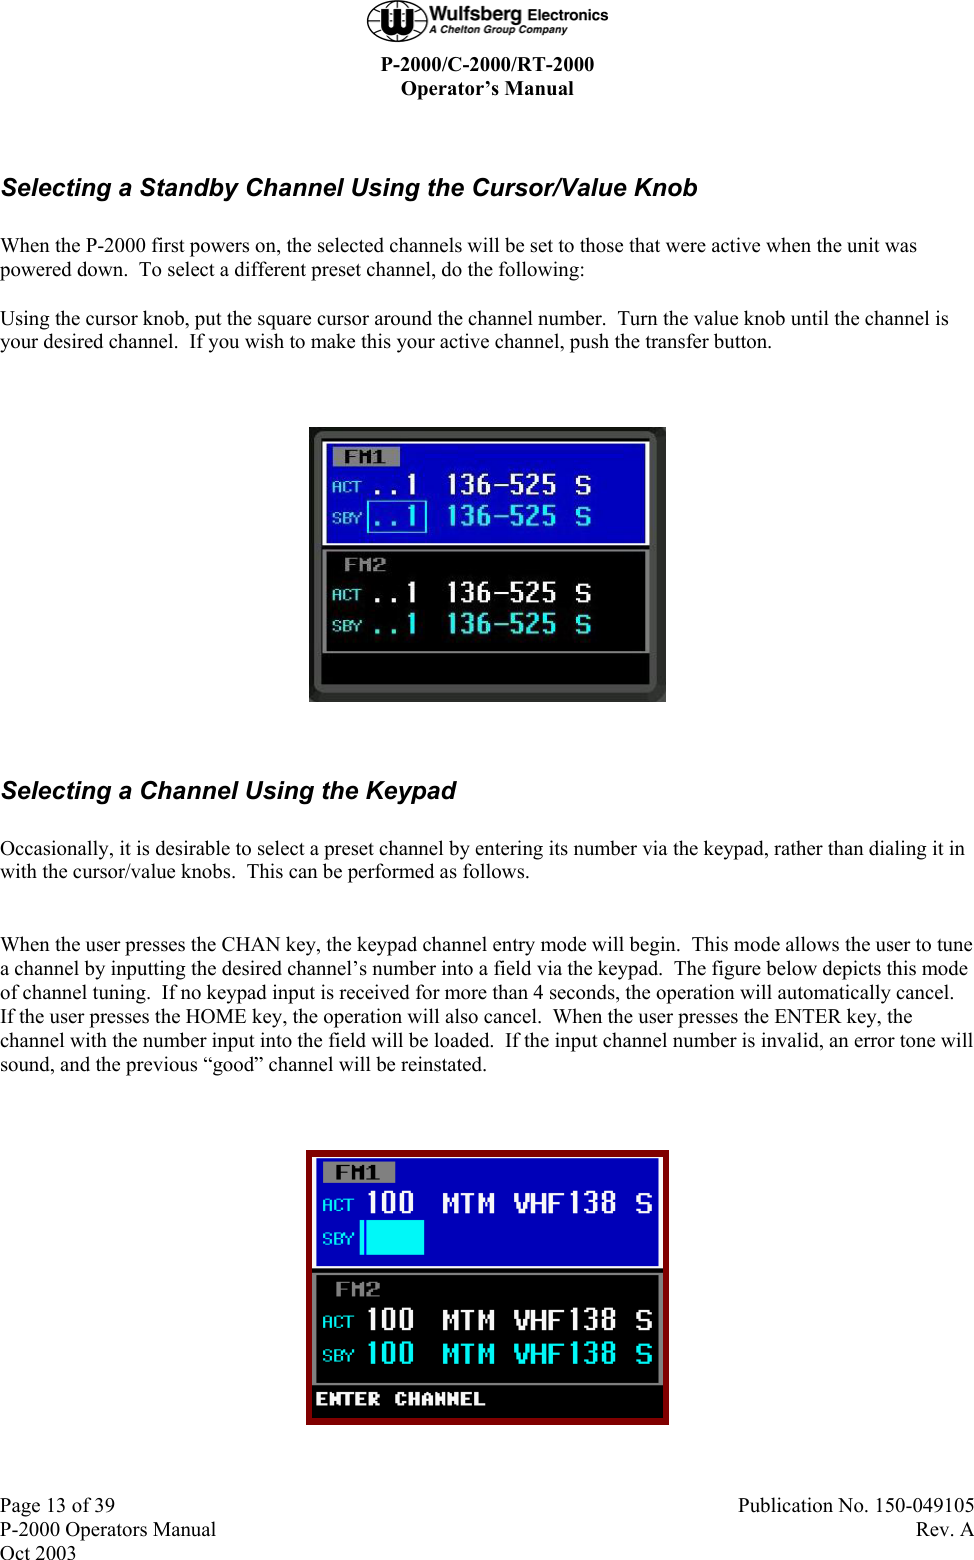  P-2000/C-2000/RT-2000 Operator’s Manual  Page 13 of 39  Publication No. 150-049105 P-2000 Operators Manual  Rev. A Oct 2003  Selecting a Standby Channel Using the Cursor/Value Knob When the P-2000 first powers on, the selected channels will be set to those that were active when the unit was powered down.  To select a different preset channel, do the following: Using the cursor knob, put the square cursor around the channel number.  Turn the value knob until the channel is your desired channel.  If you wish to make this your active channel, push the transfer button.    Selecting a Channel Using the Keypad Occasionally, it is desirable to select a preset channel by entering its number via the keypad, rather than dialing it in with the cursor/value knobs.  This can be performed as follows.  When the user presses the CHAN key, the keypad channel entry mode will begin.  This mode allows the user to tune a channel by inputting the desired channel’s number into a field via the keypad.  The figure below depicts this mode of channel tuning.  If no keypad input is received for more than 4 seconds, the operation will automatically cancel.  If the user presses the HOME key, the operation will also cancel.  When the user presses the ENTER key, the channel with the number input into the field will be loaded.  If the input channel number is invalid, an error tone will sound, and the previous “good” channel will be reinstated.   